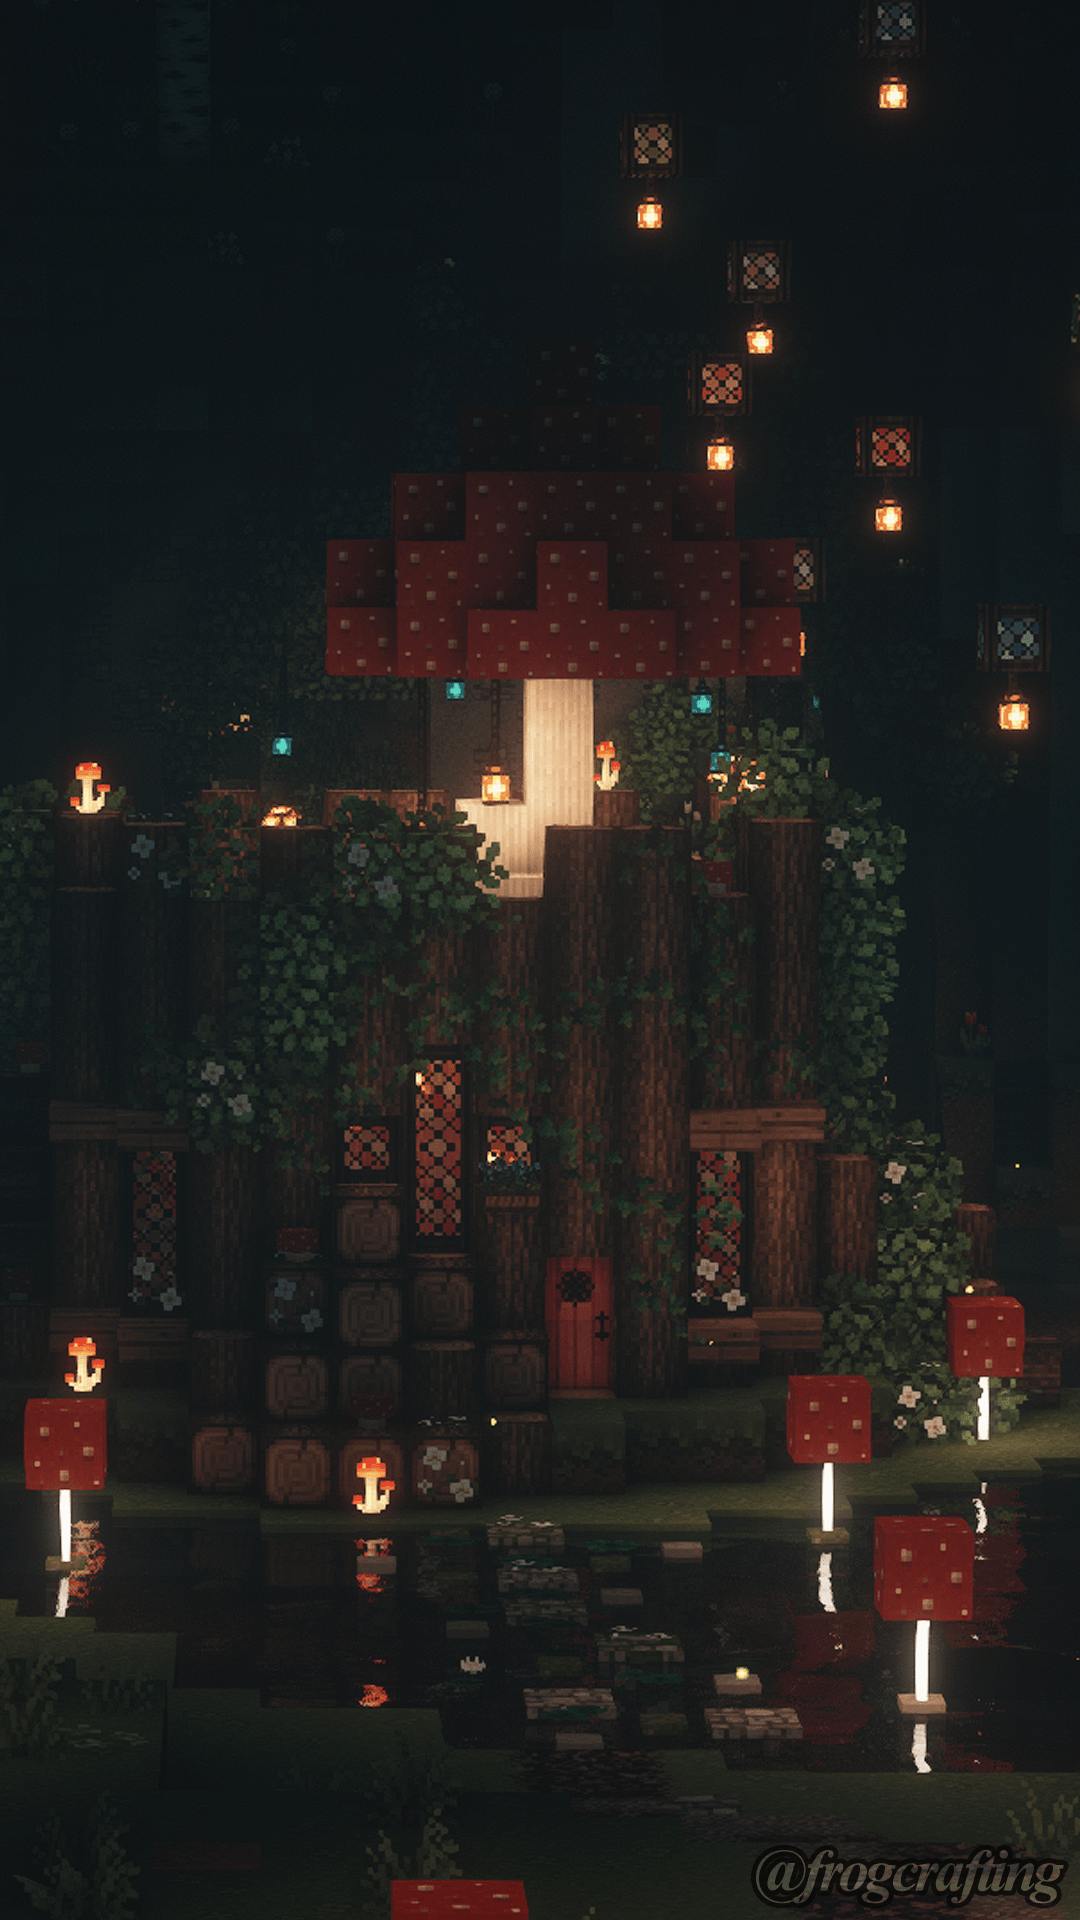 A small house built into a tree in the forest, surrounded by lanterns. - Minecraft